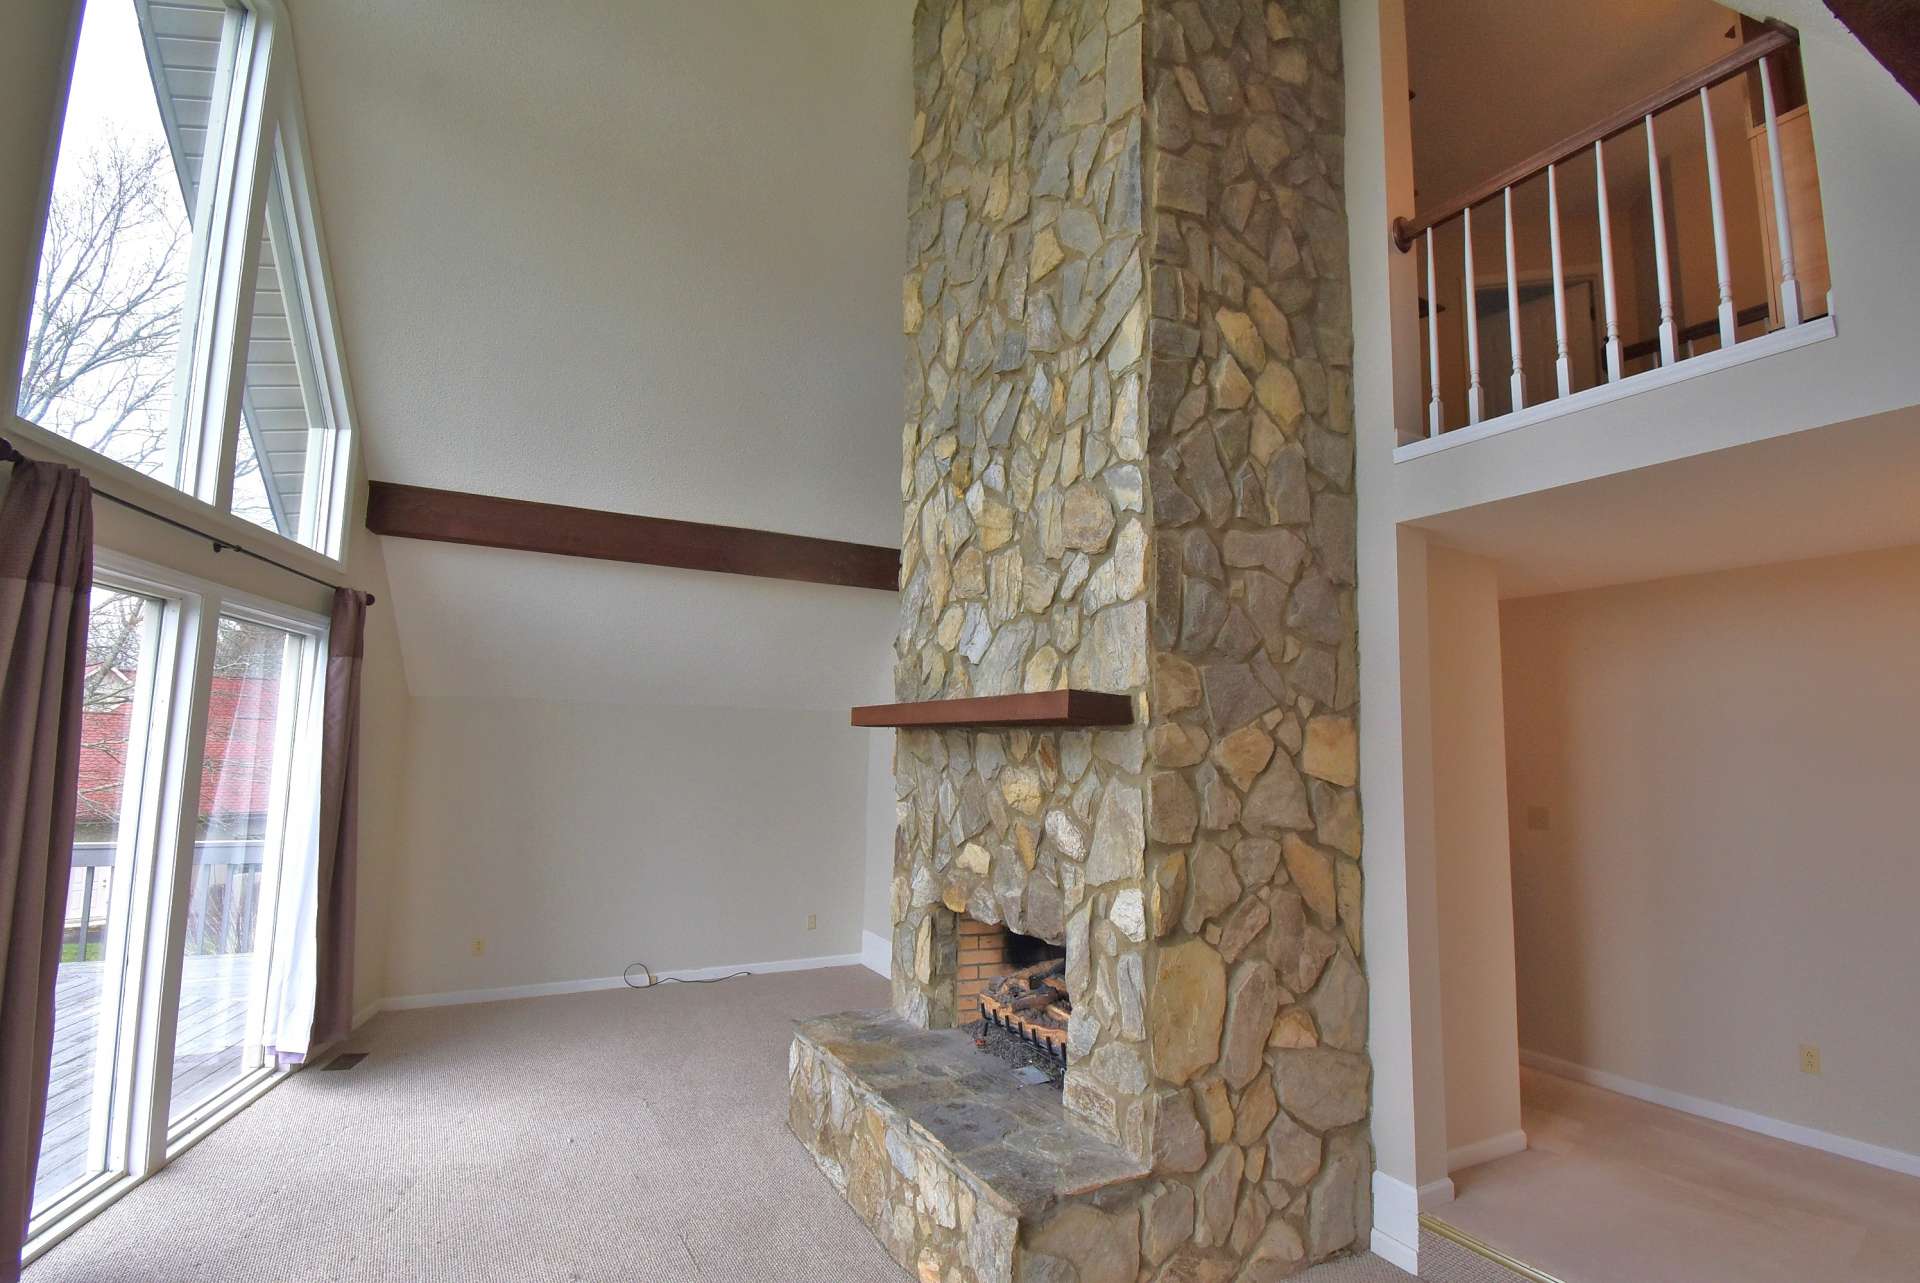 The living area features vaulted ceiling, a two-story stone fireplace with gas logs, and a wall of windows to fill the room with lots of natural light.